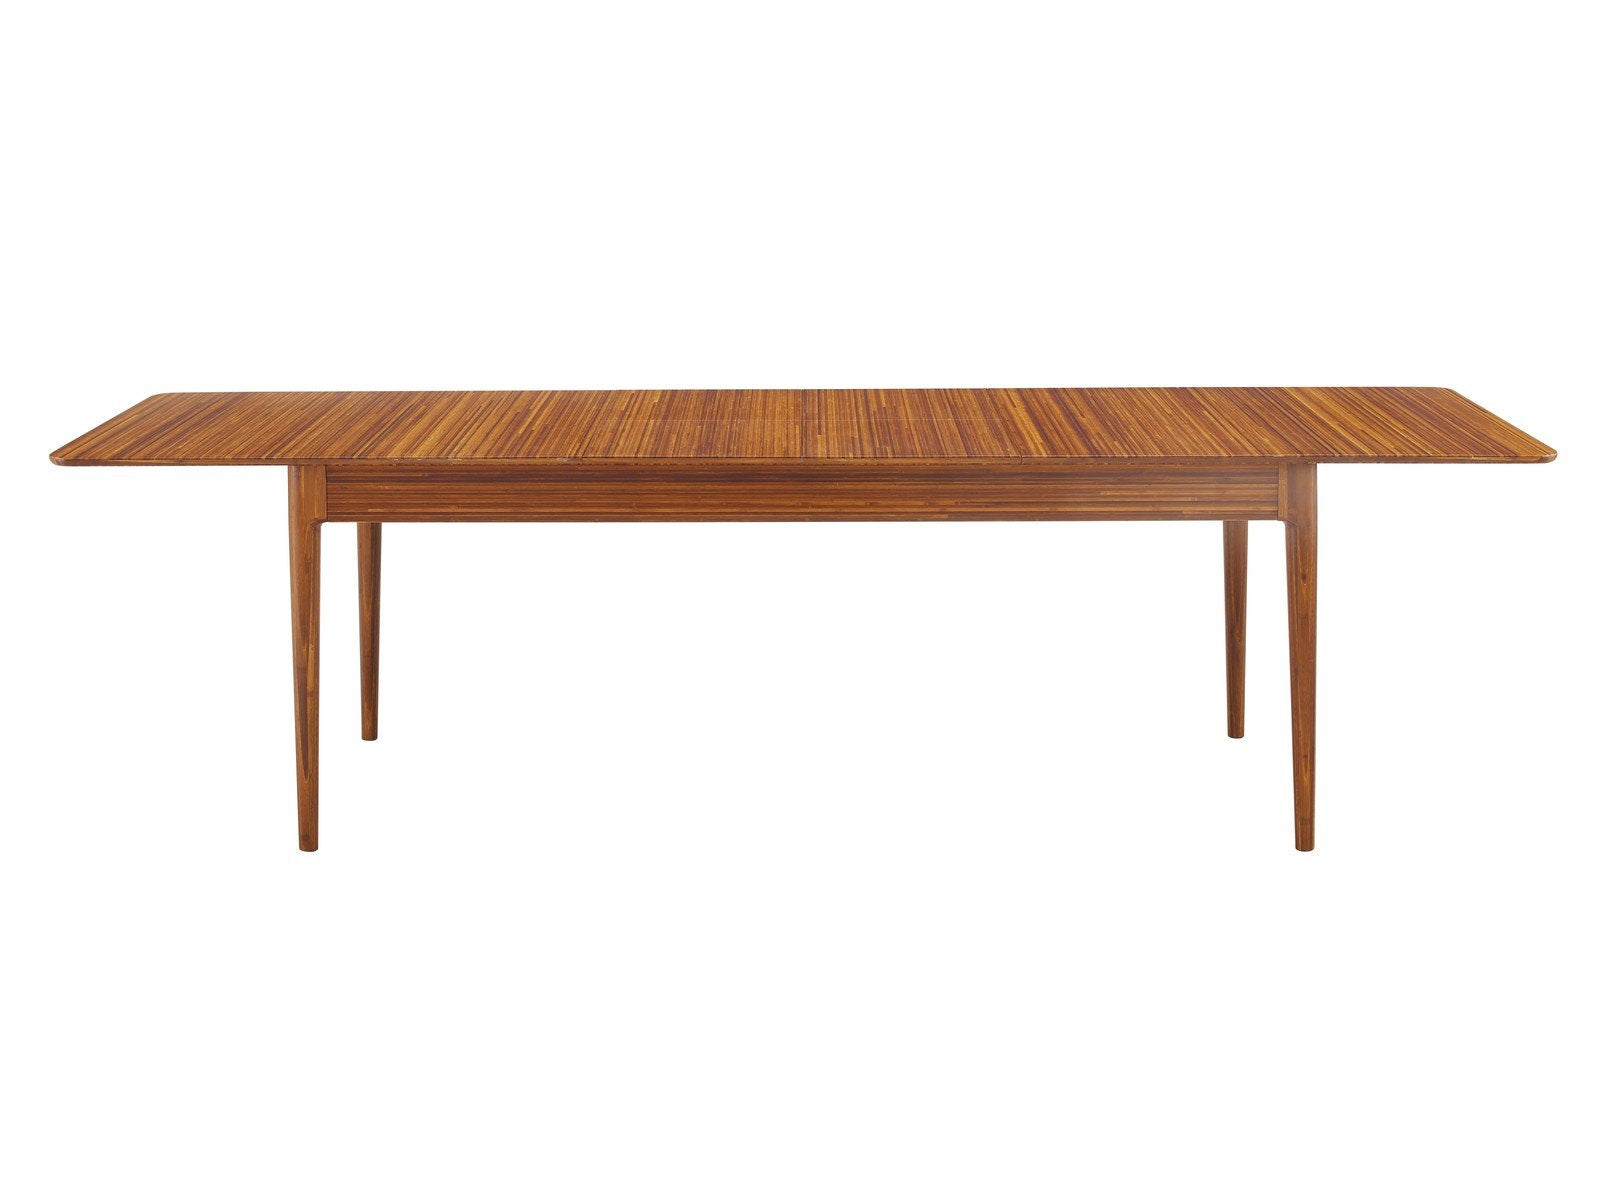 Greenington Erikka 110" Double-Leaves Extensible Dining Table, Amber - GE0001AM - 12